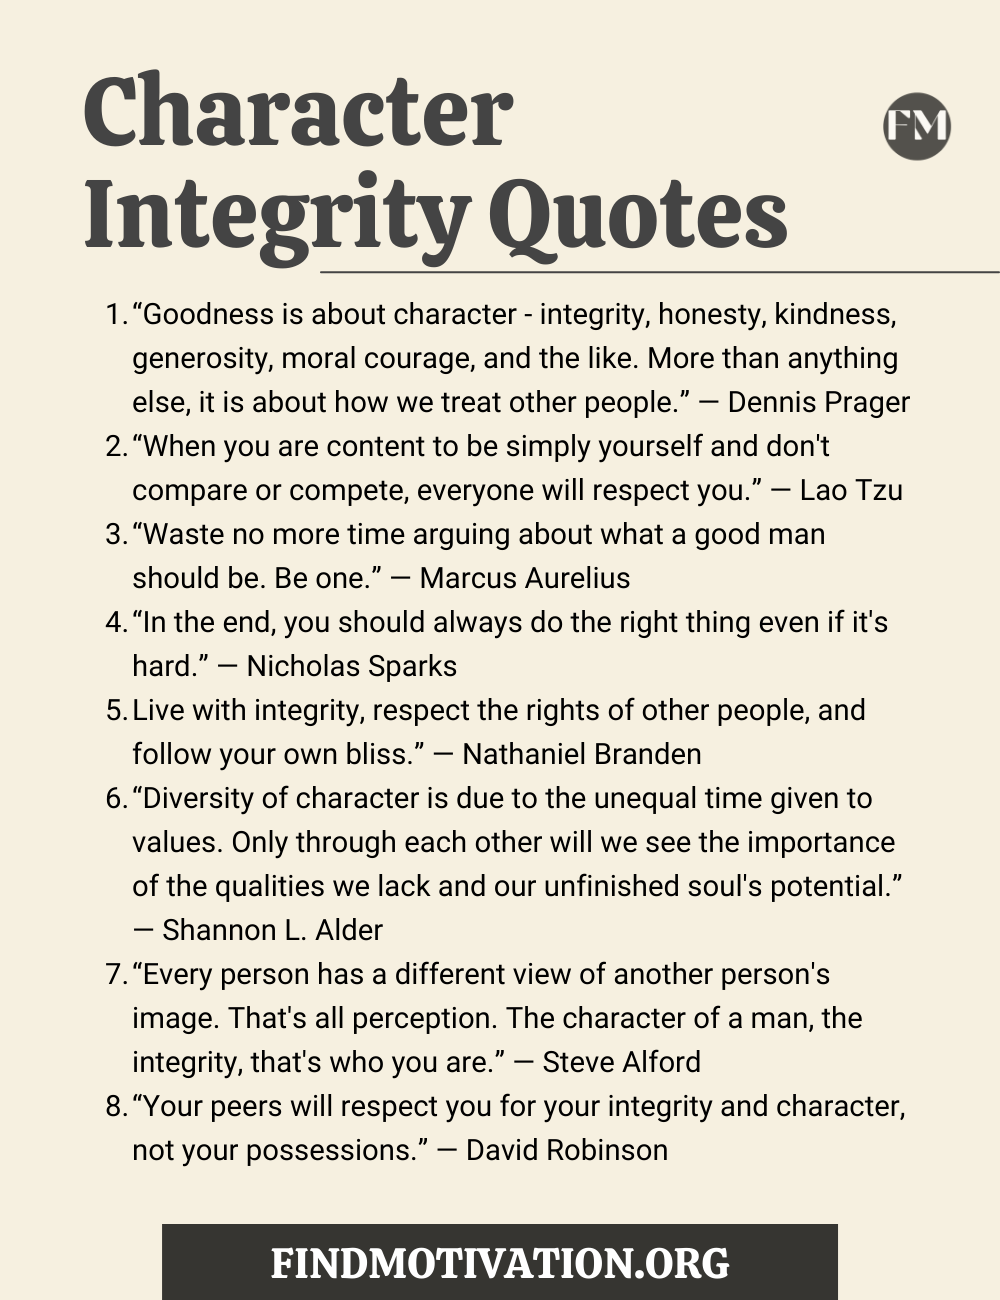 Character Integrity Quotes